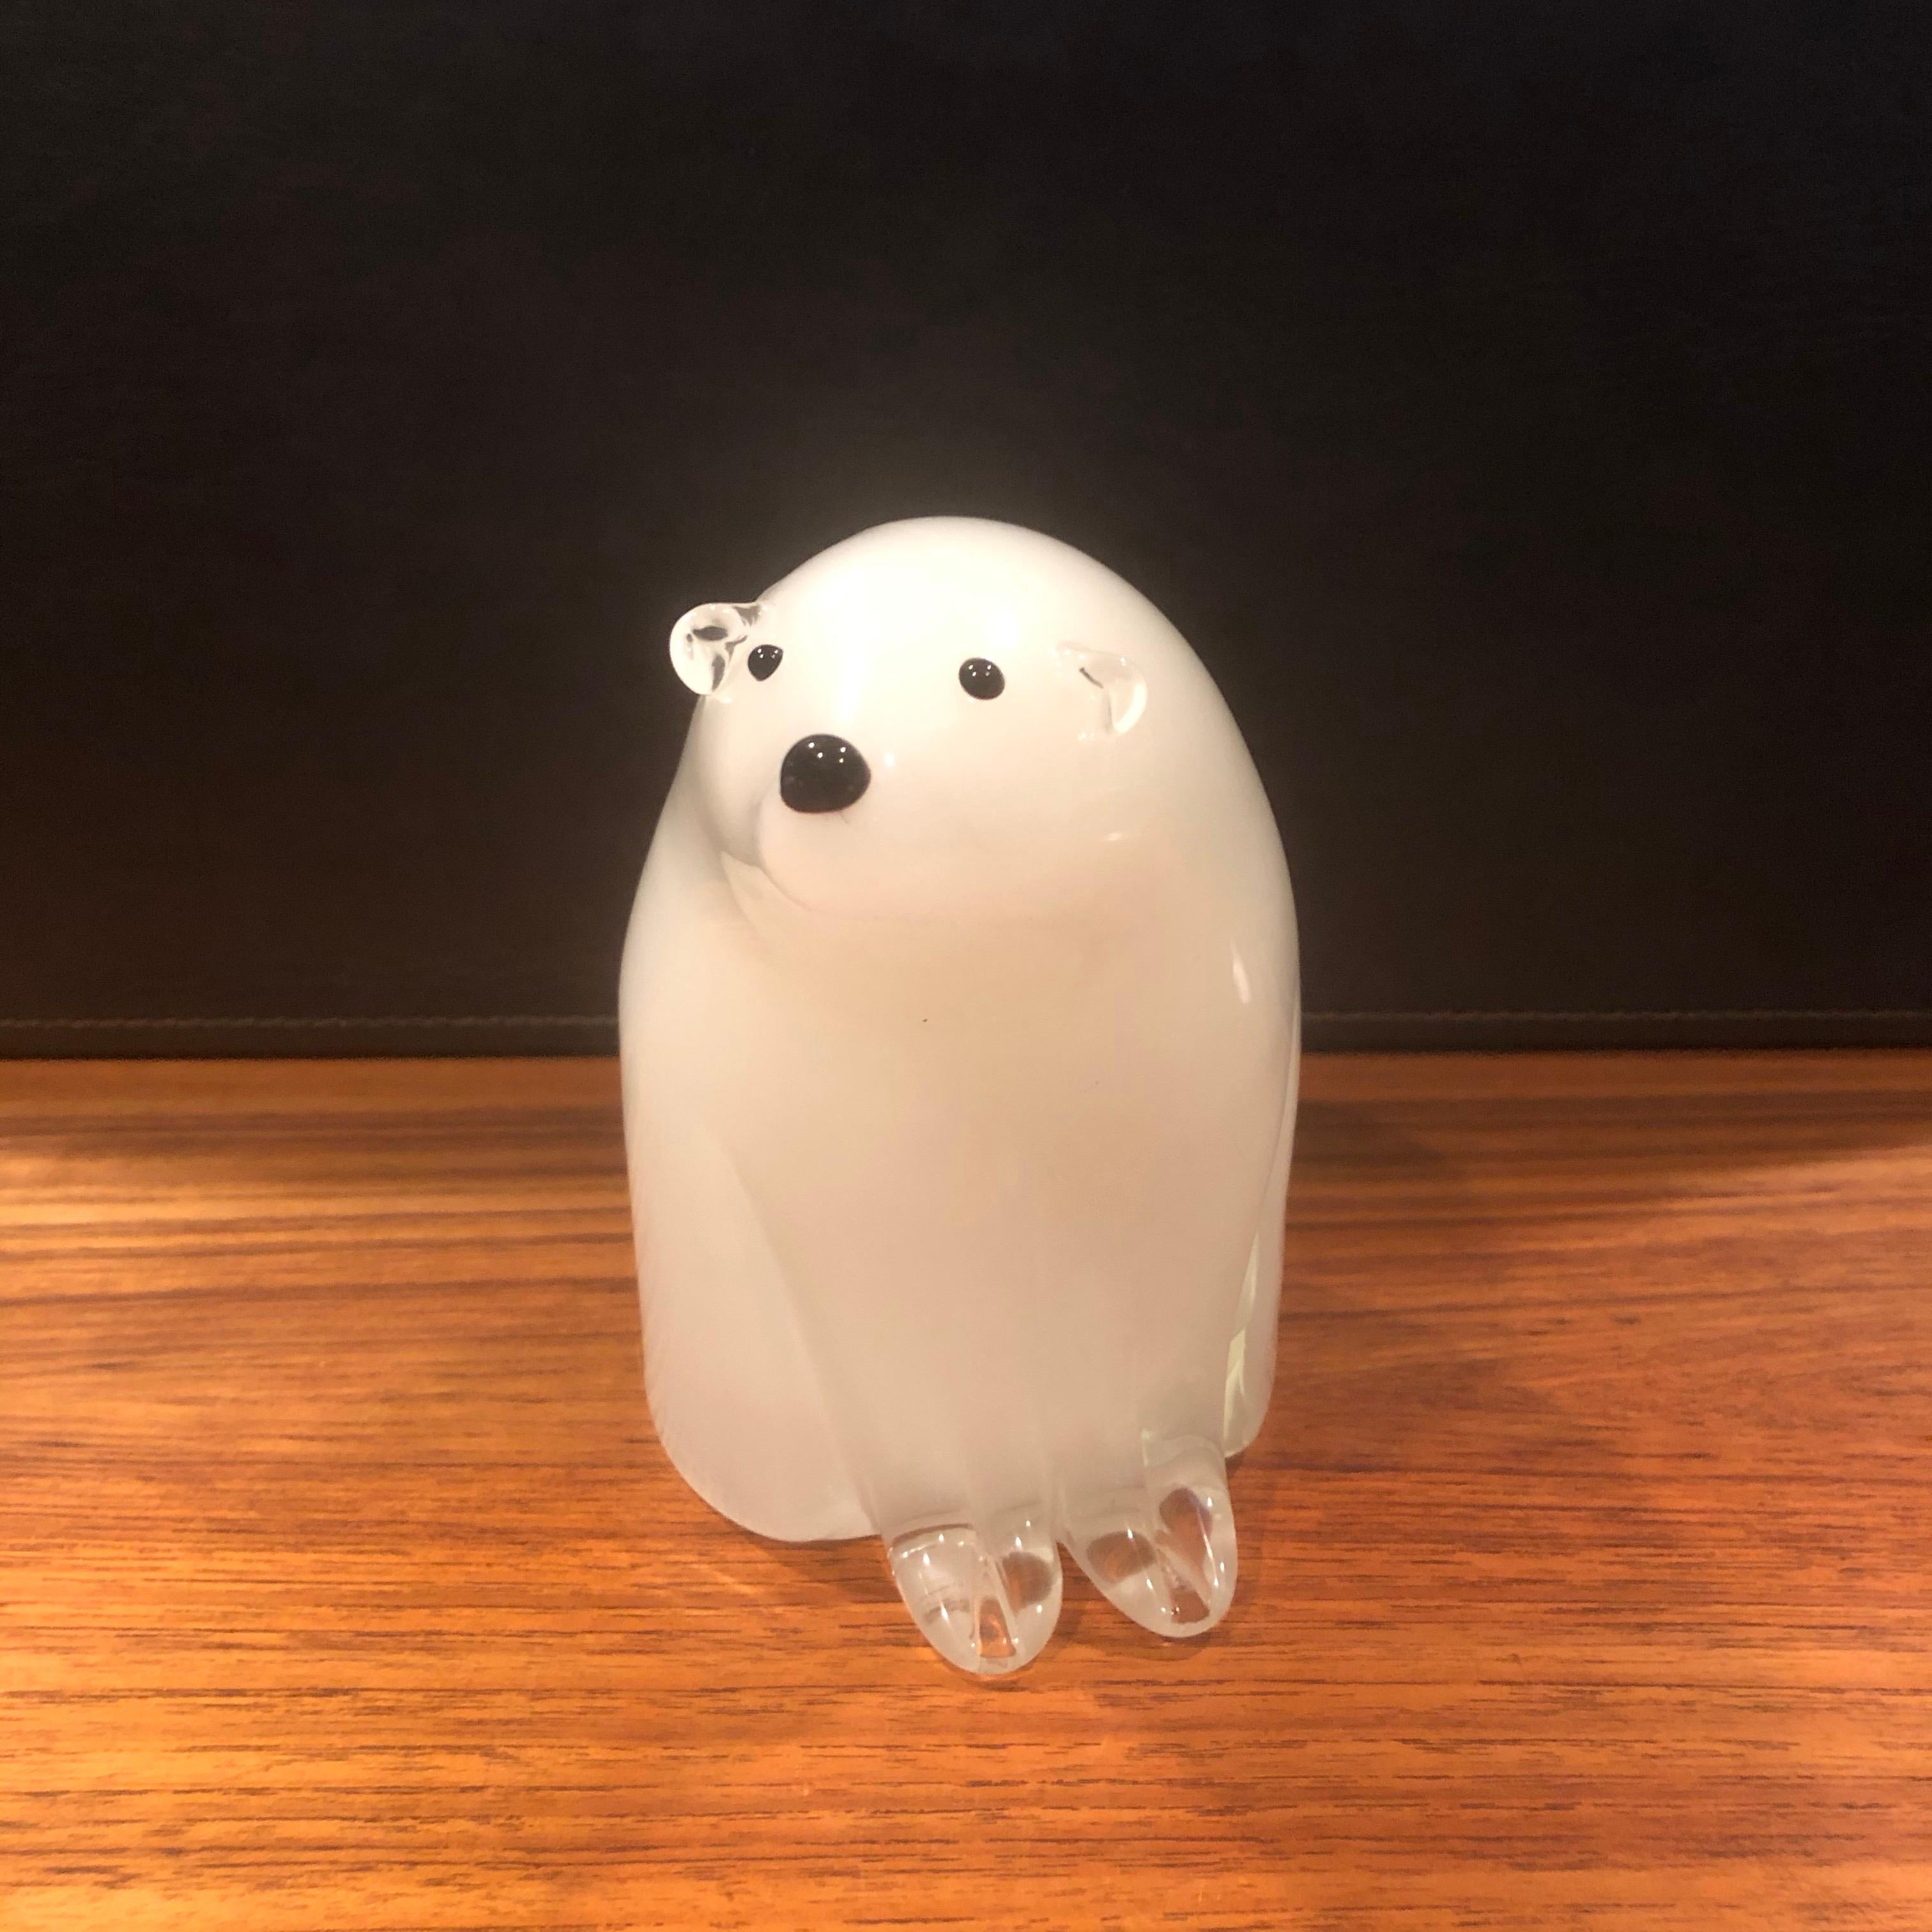 A very nice sommerso art glass polar bear sculpture by Murano, circa 1970s. The outline of the sculpture is clear blown glass with a bright white inner core. Has vintage Murano foil sticker label.